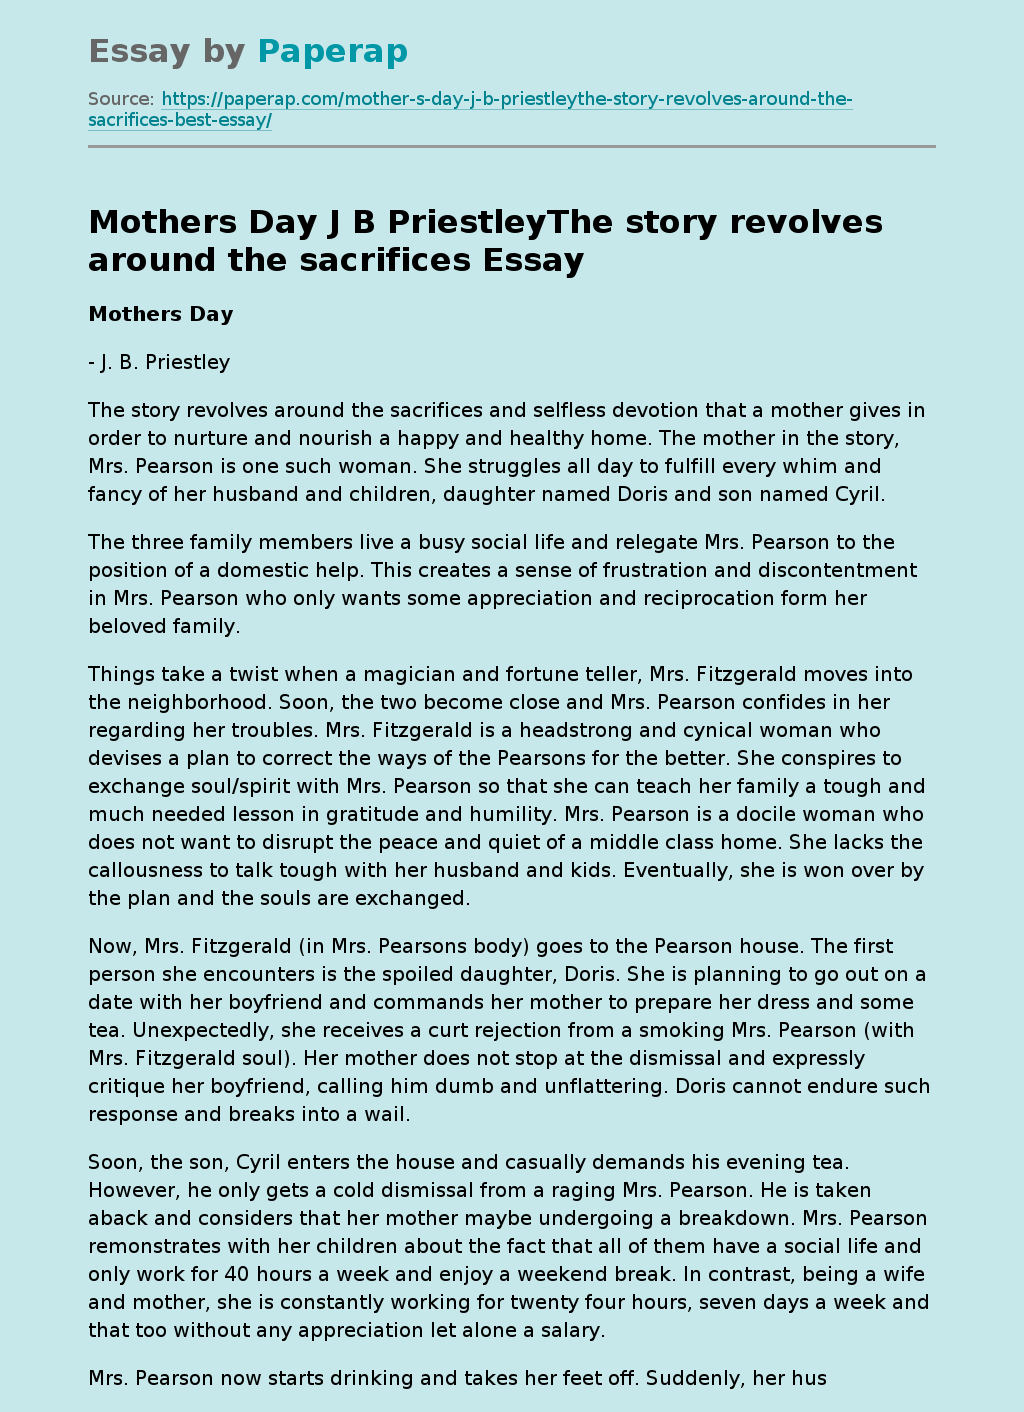 Mothers Day J B PriestleyThe story revolves around the sacrifices